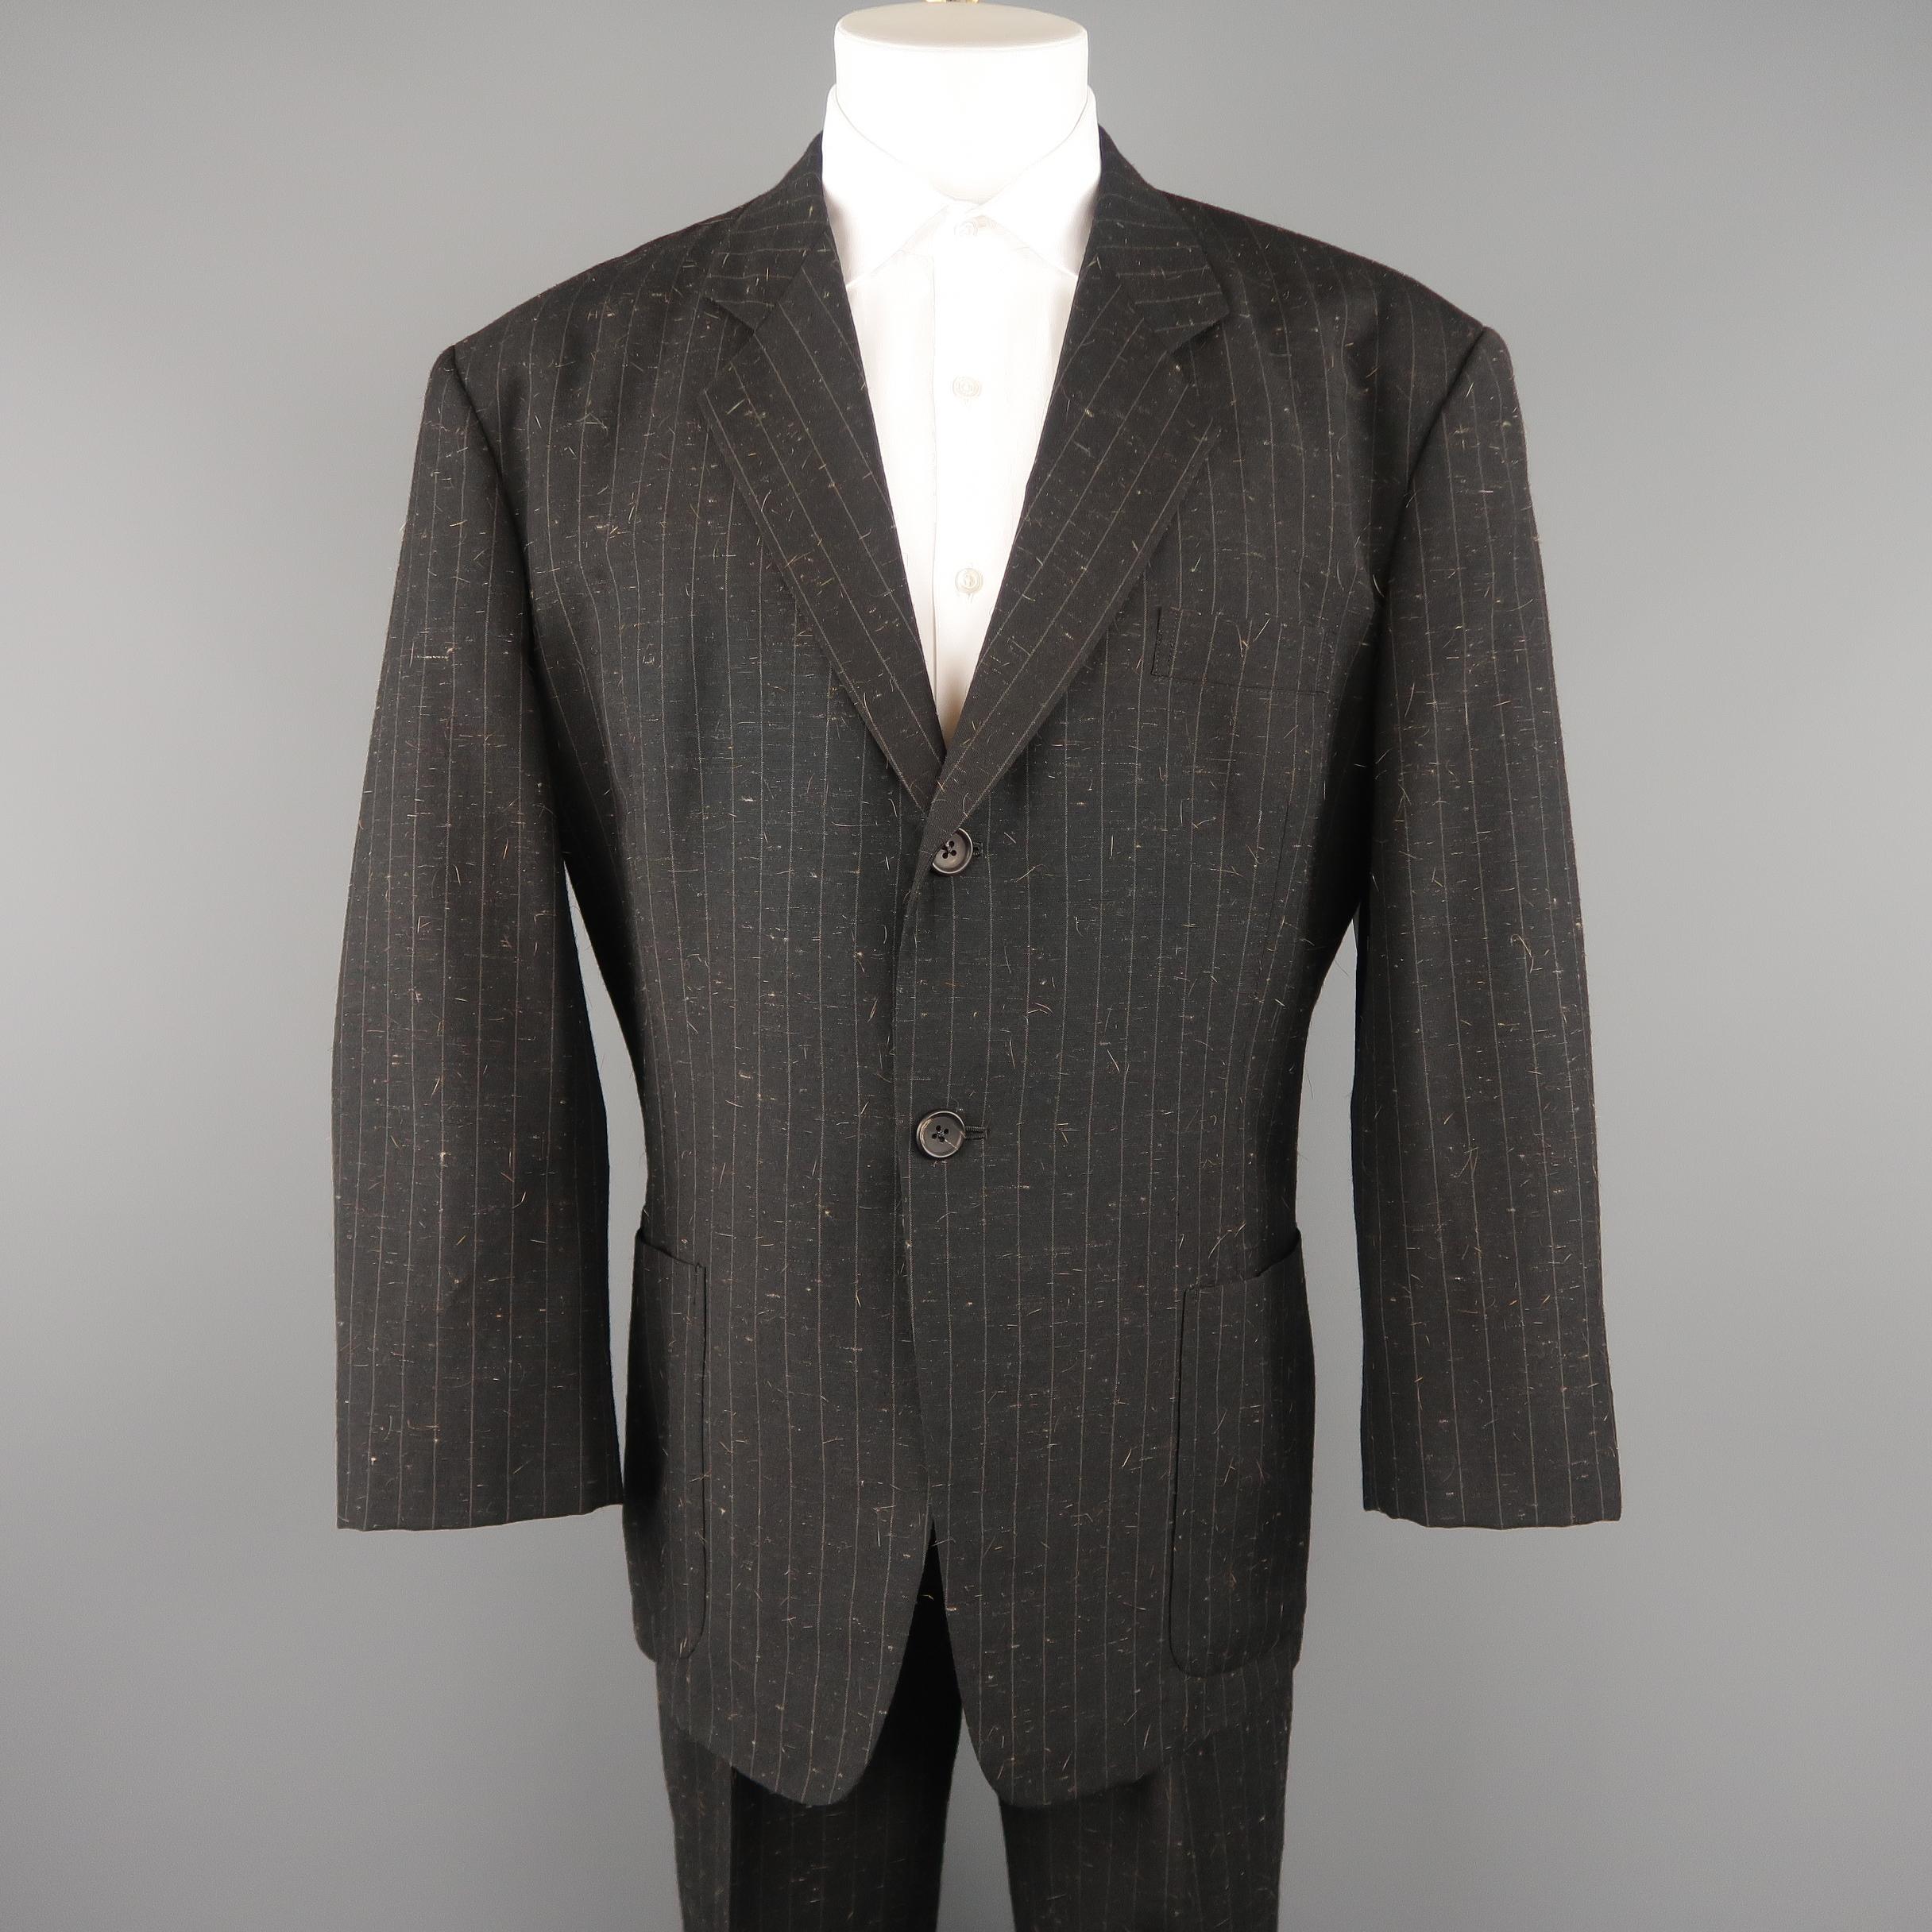 Rare vintage YOHJI YAMAMOTO POUR HOMME  suit includes an oversized, single breasted notch lapel sport coat in a unique charcoal pinstripe brown hair textured wool blend and matching flat front trousers. 

Made in Japan. 
Excellent Pre-Owned